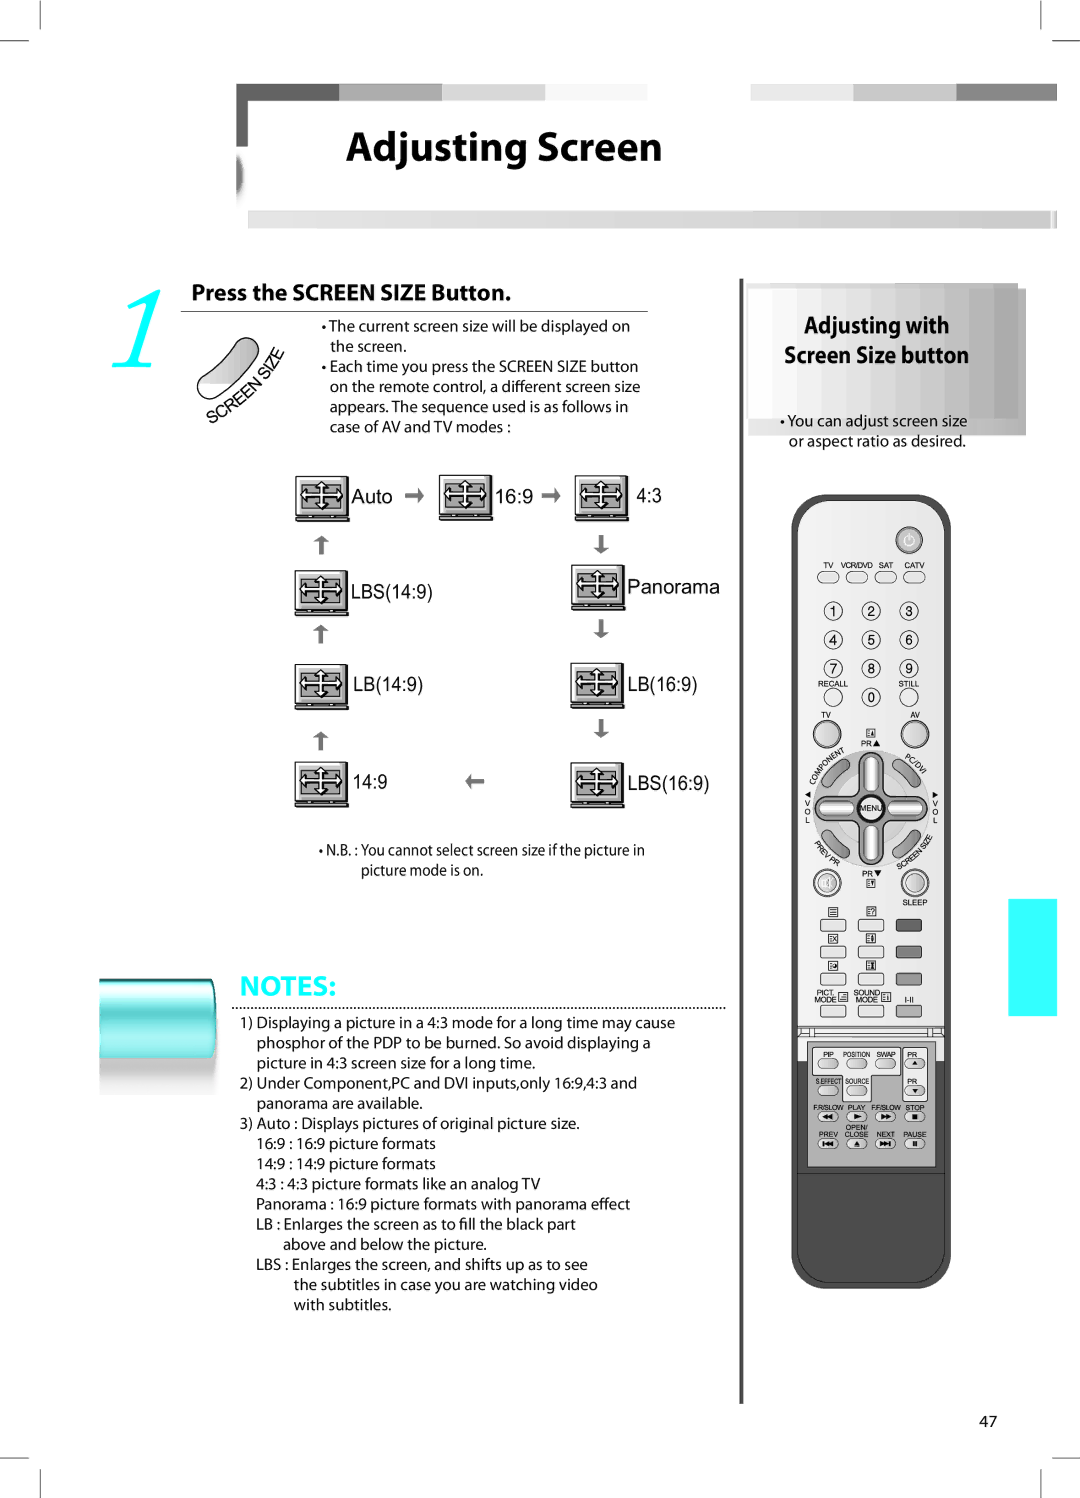 Daewoo DT-42A1 user manual Press the Screen Size Button, Adjusting with Screen Size button 